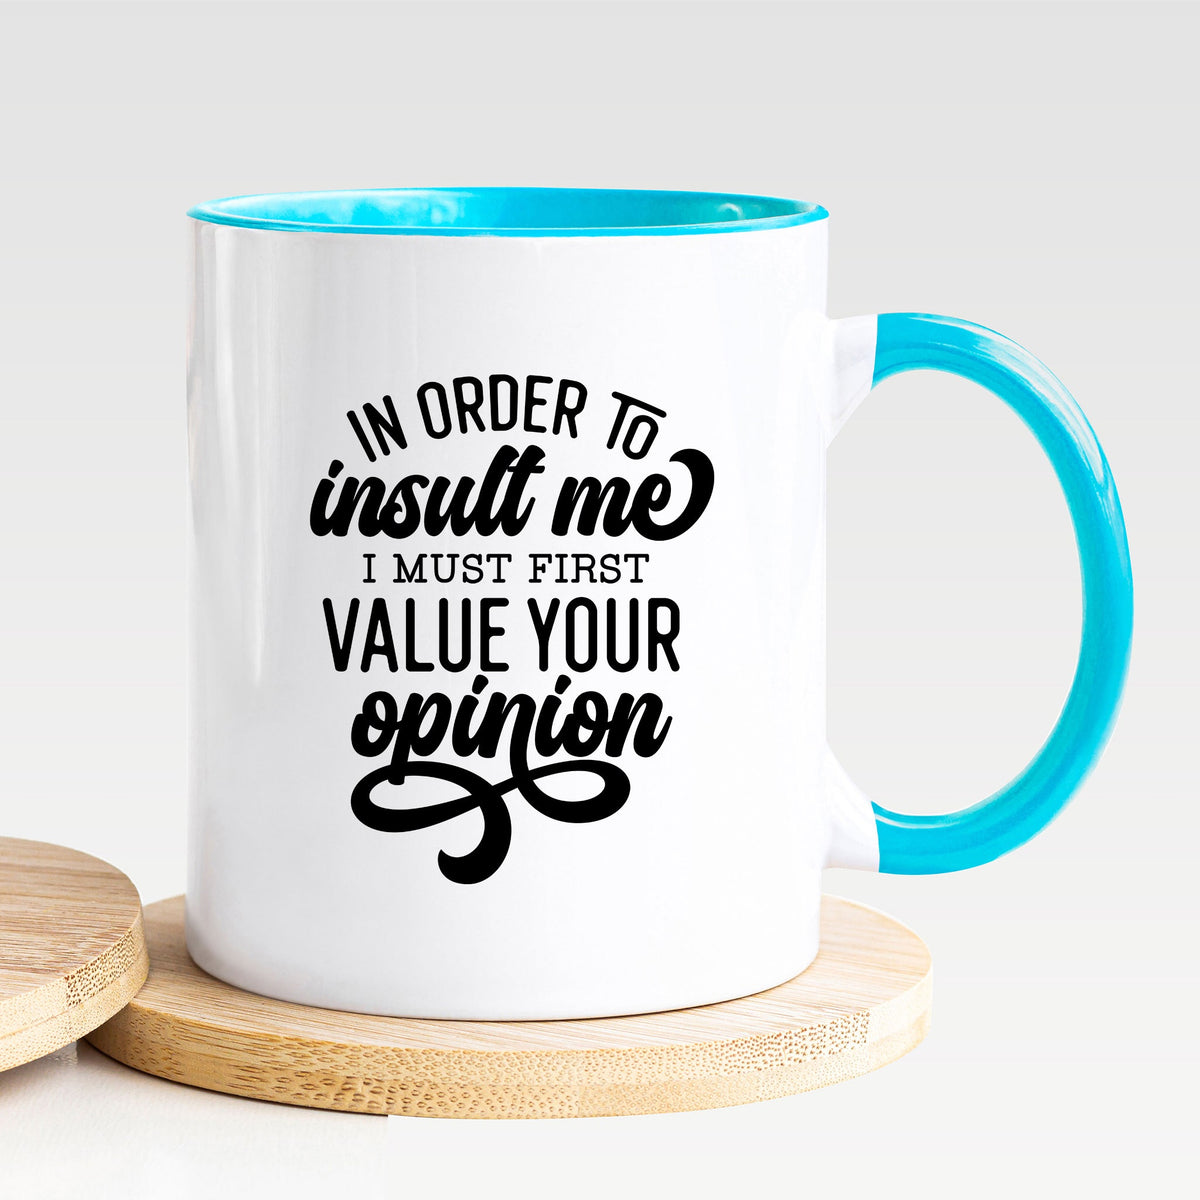 In Order To Insult Me I Must First Value Your Opinion - Mug